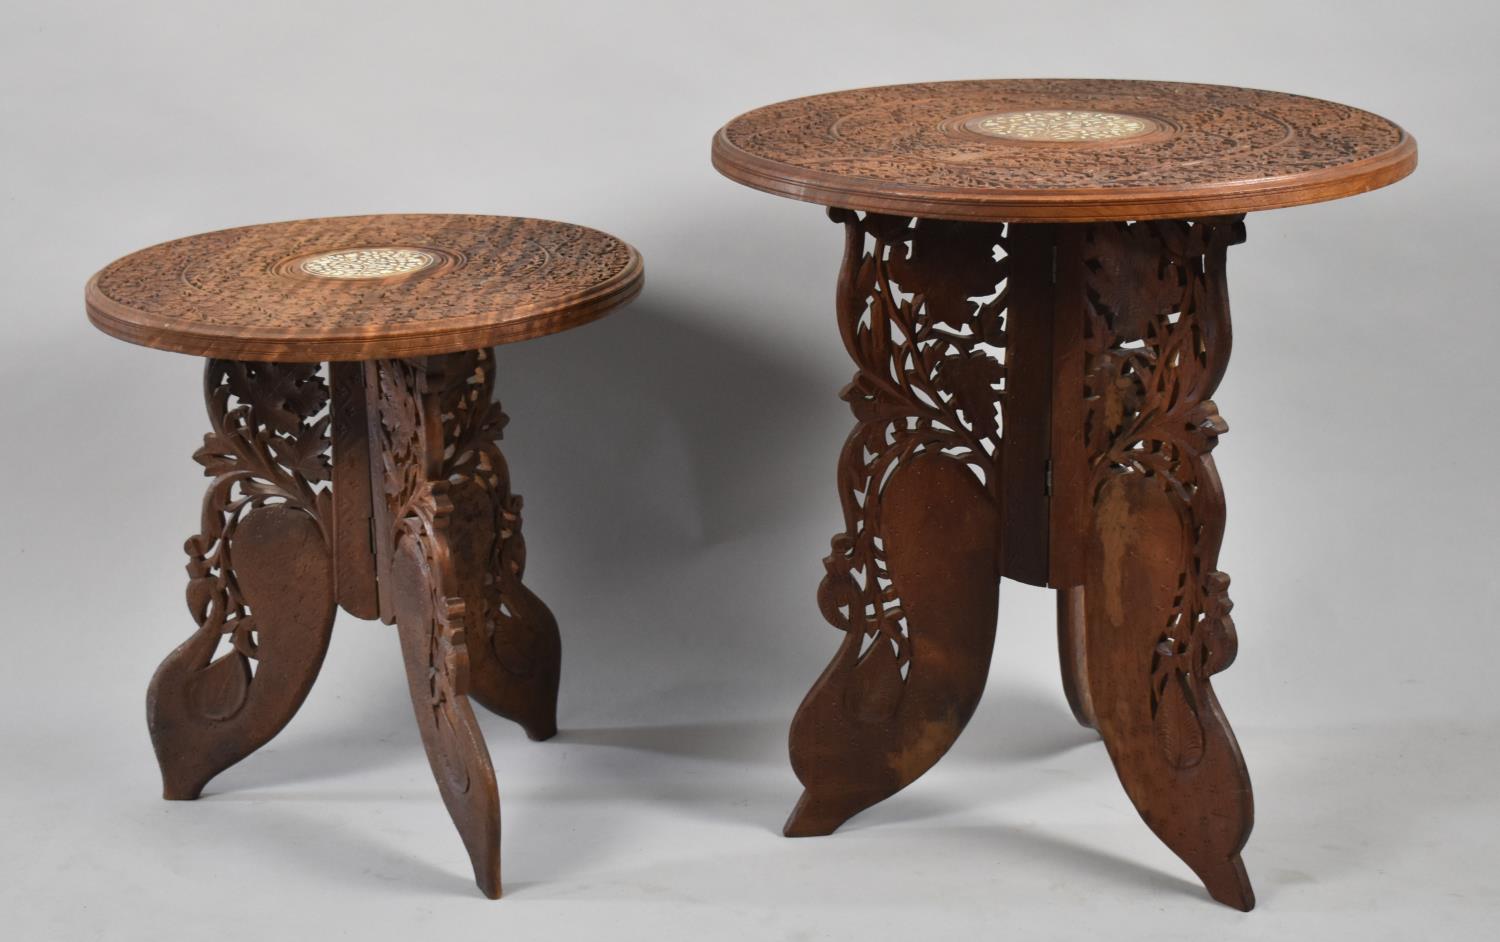 Two Ornately Carved Circular Indian Occasional Tables on Folding Tripod Supports, 45cm and 38cm